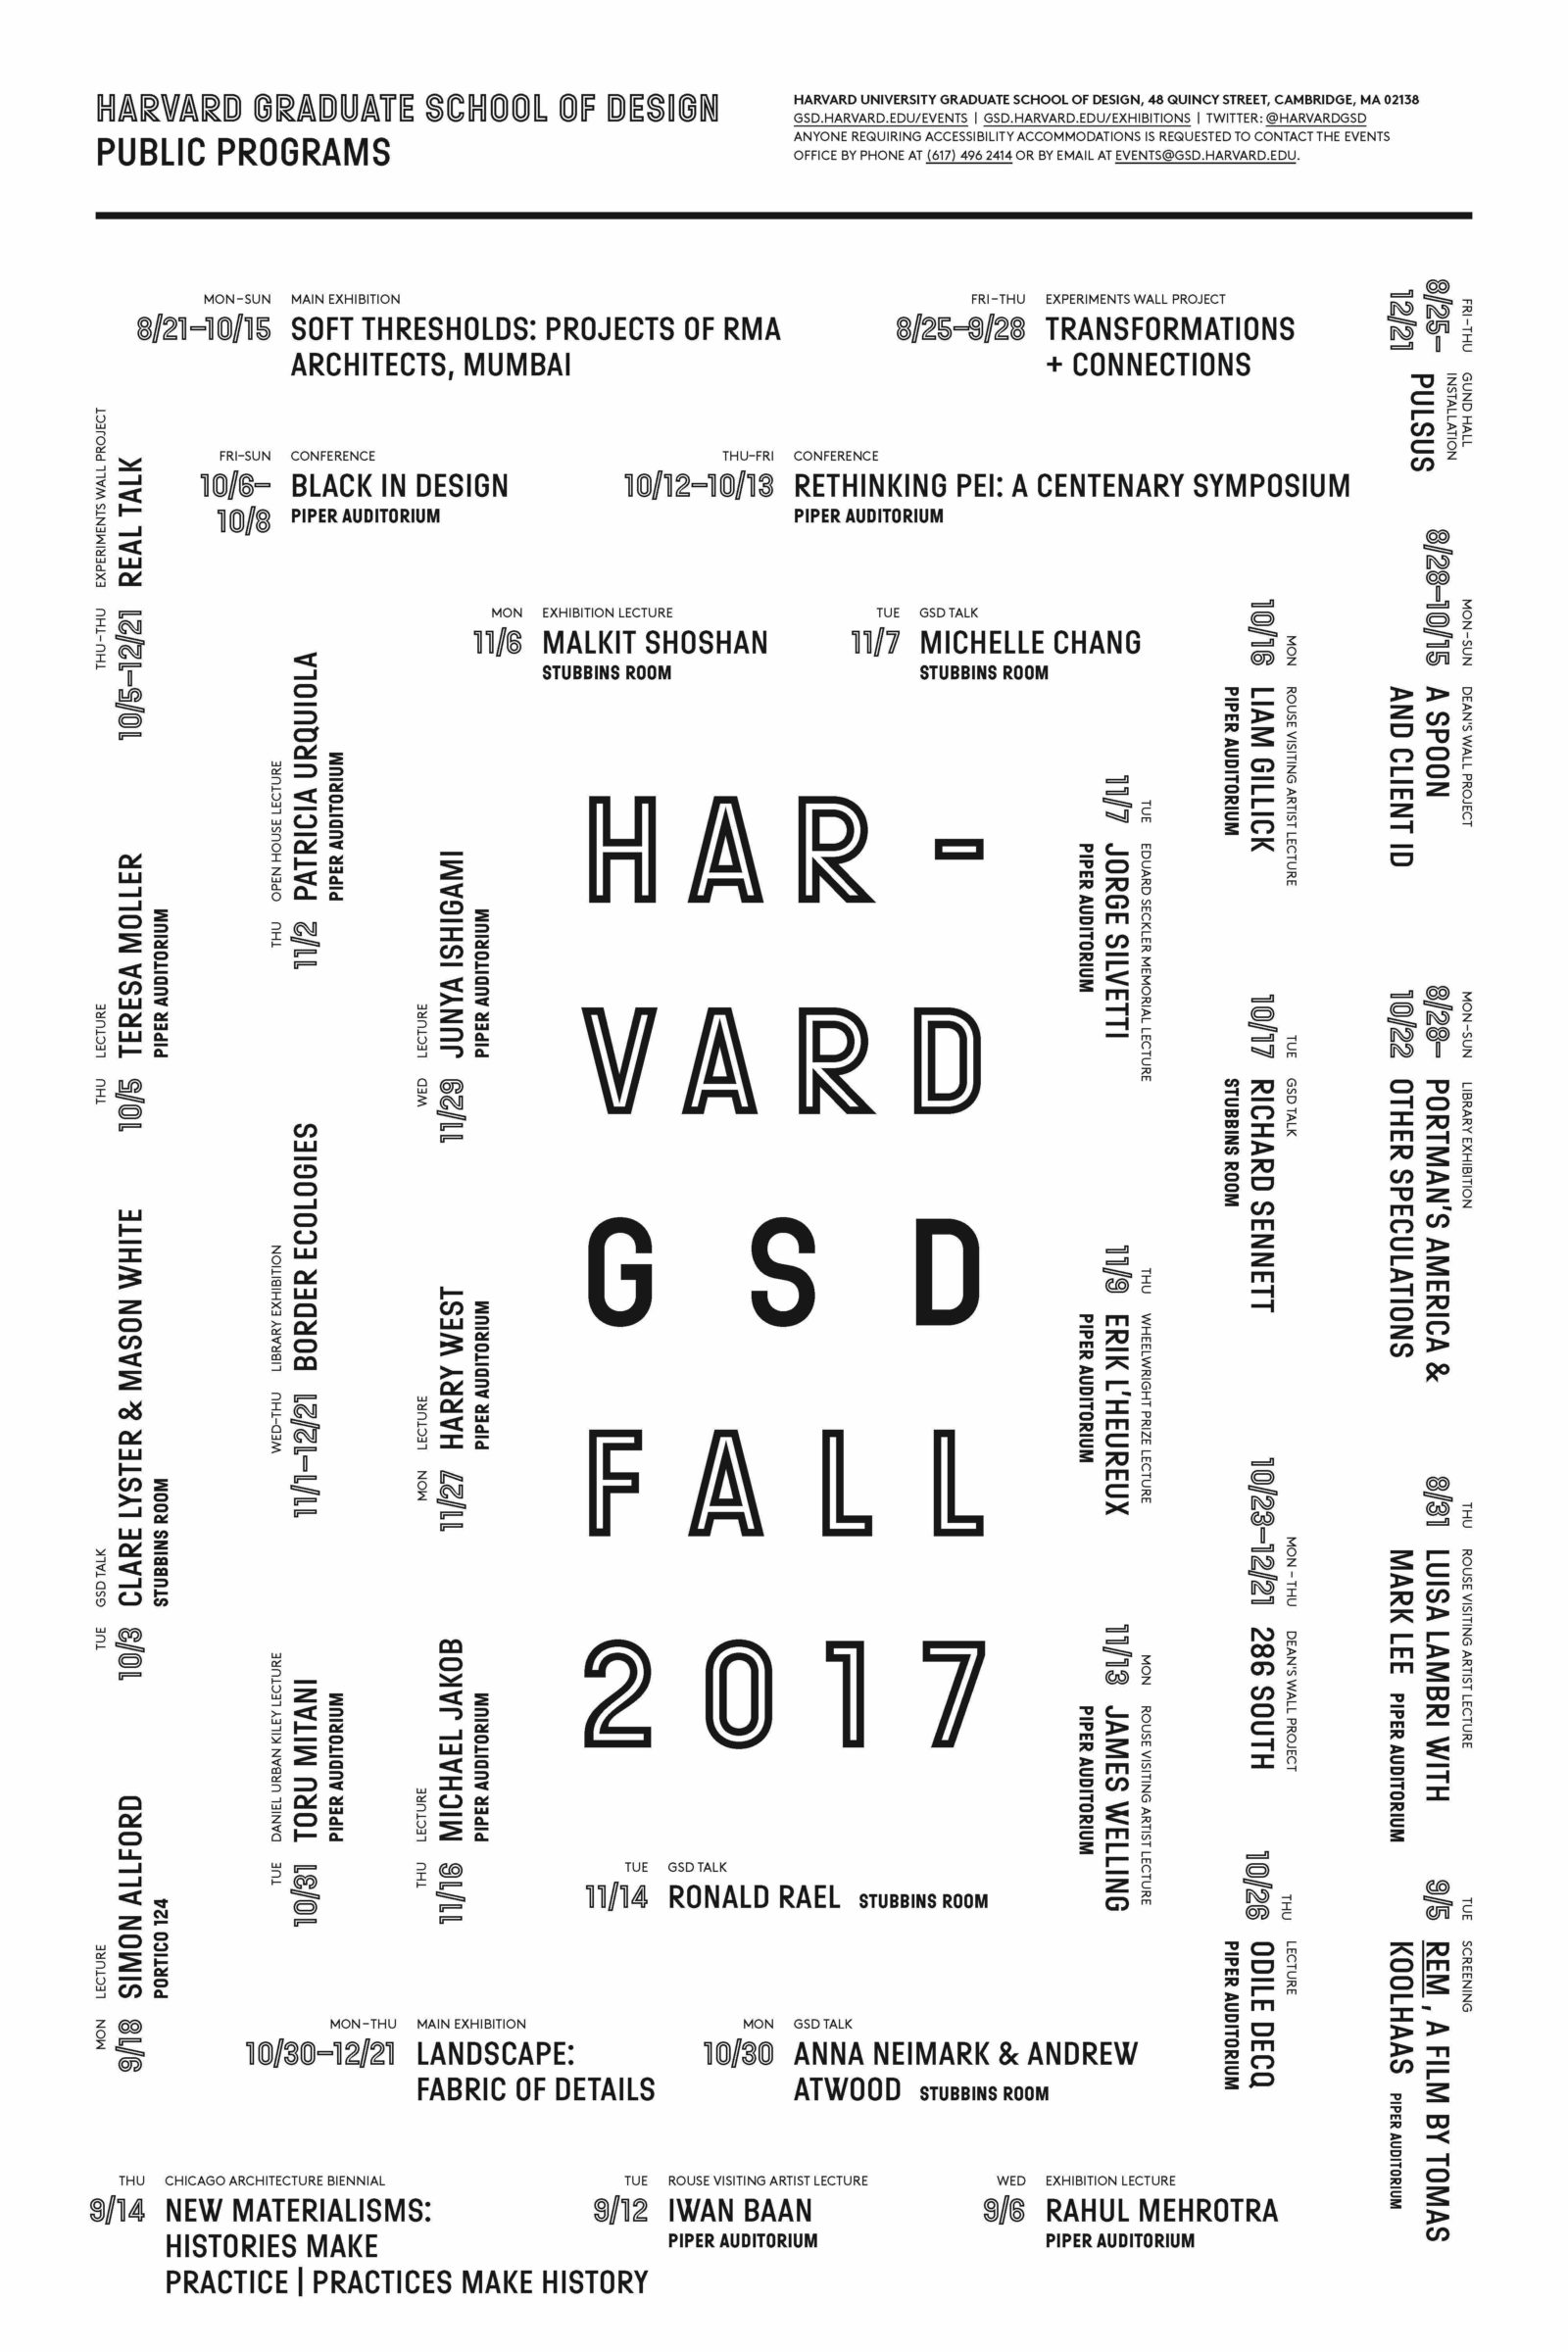 The poster announcing the Harvard GSD's Fall 2017 public lecture series. Poster design by Remeike Forbes.